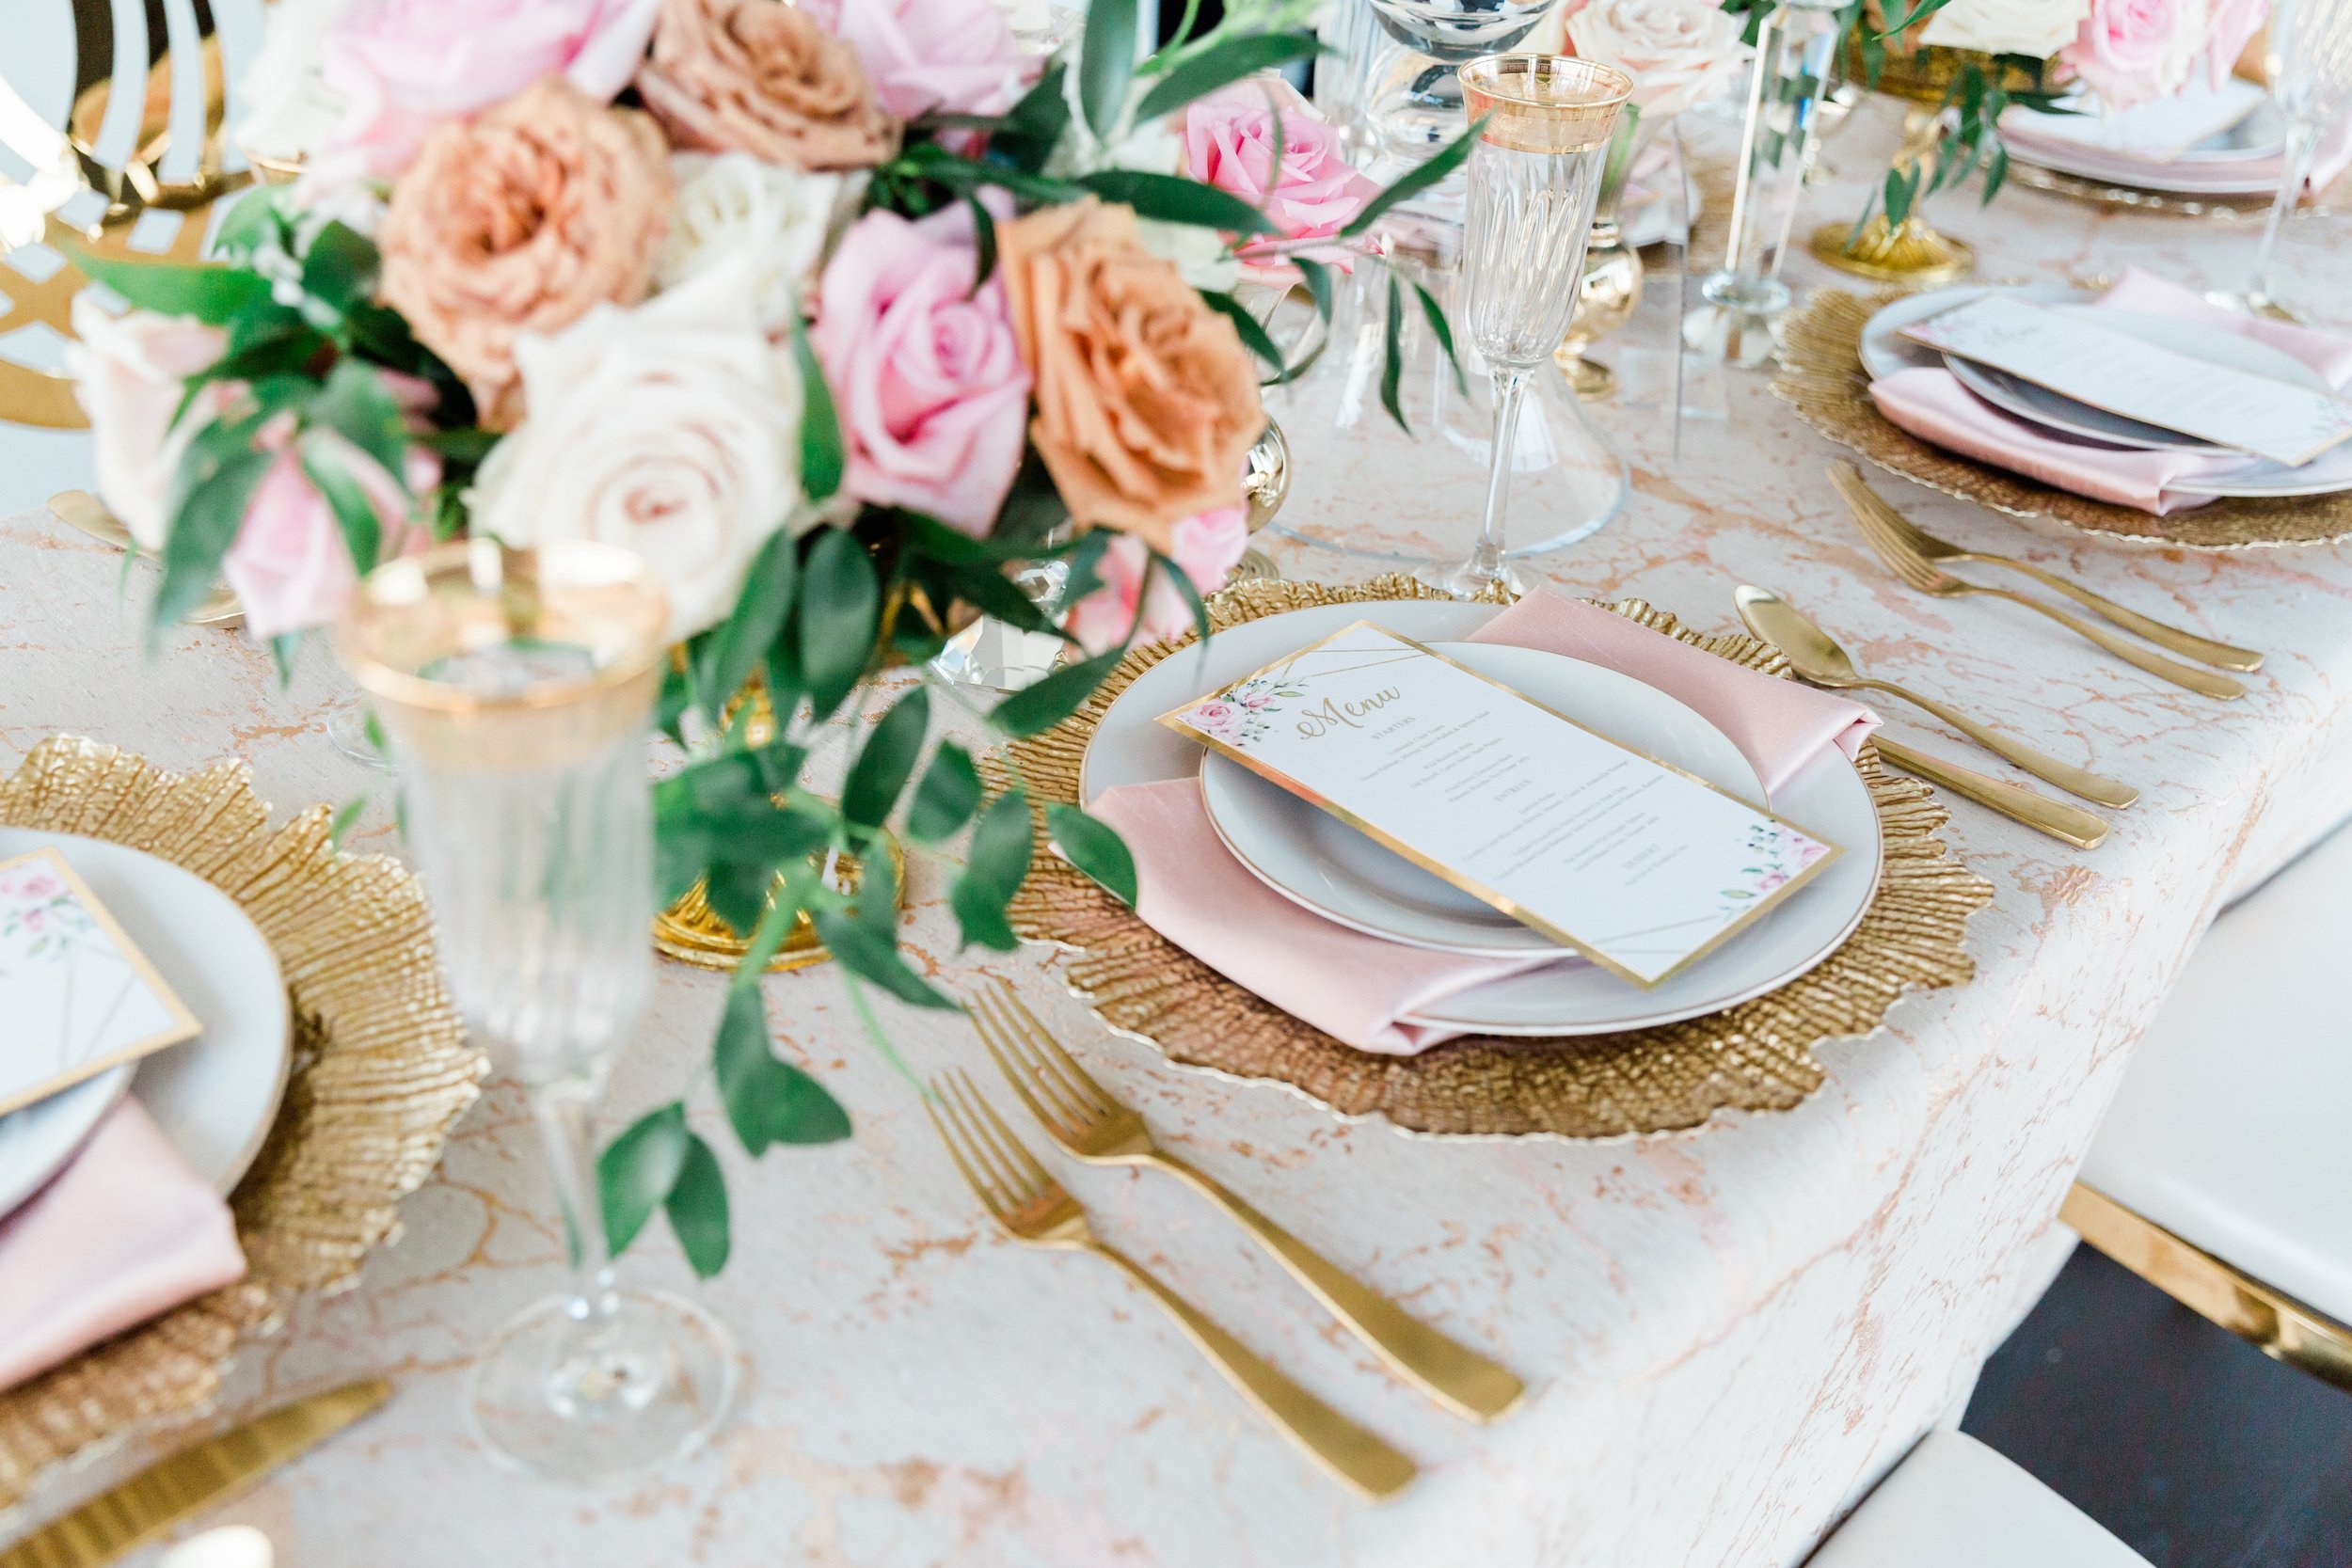 Tablescape with gold accents, blush linen, and roses